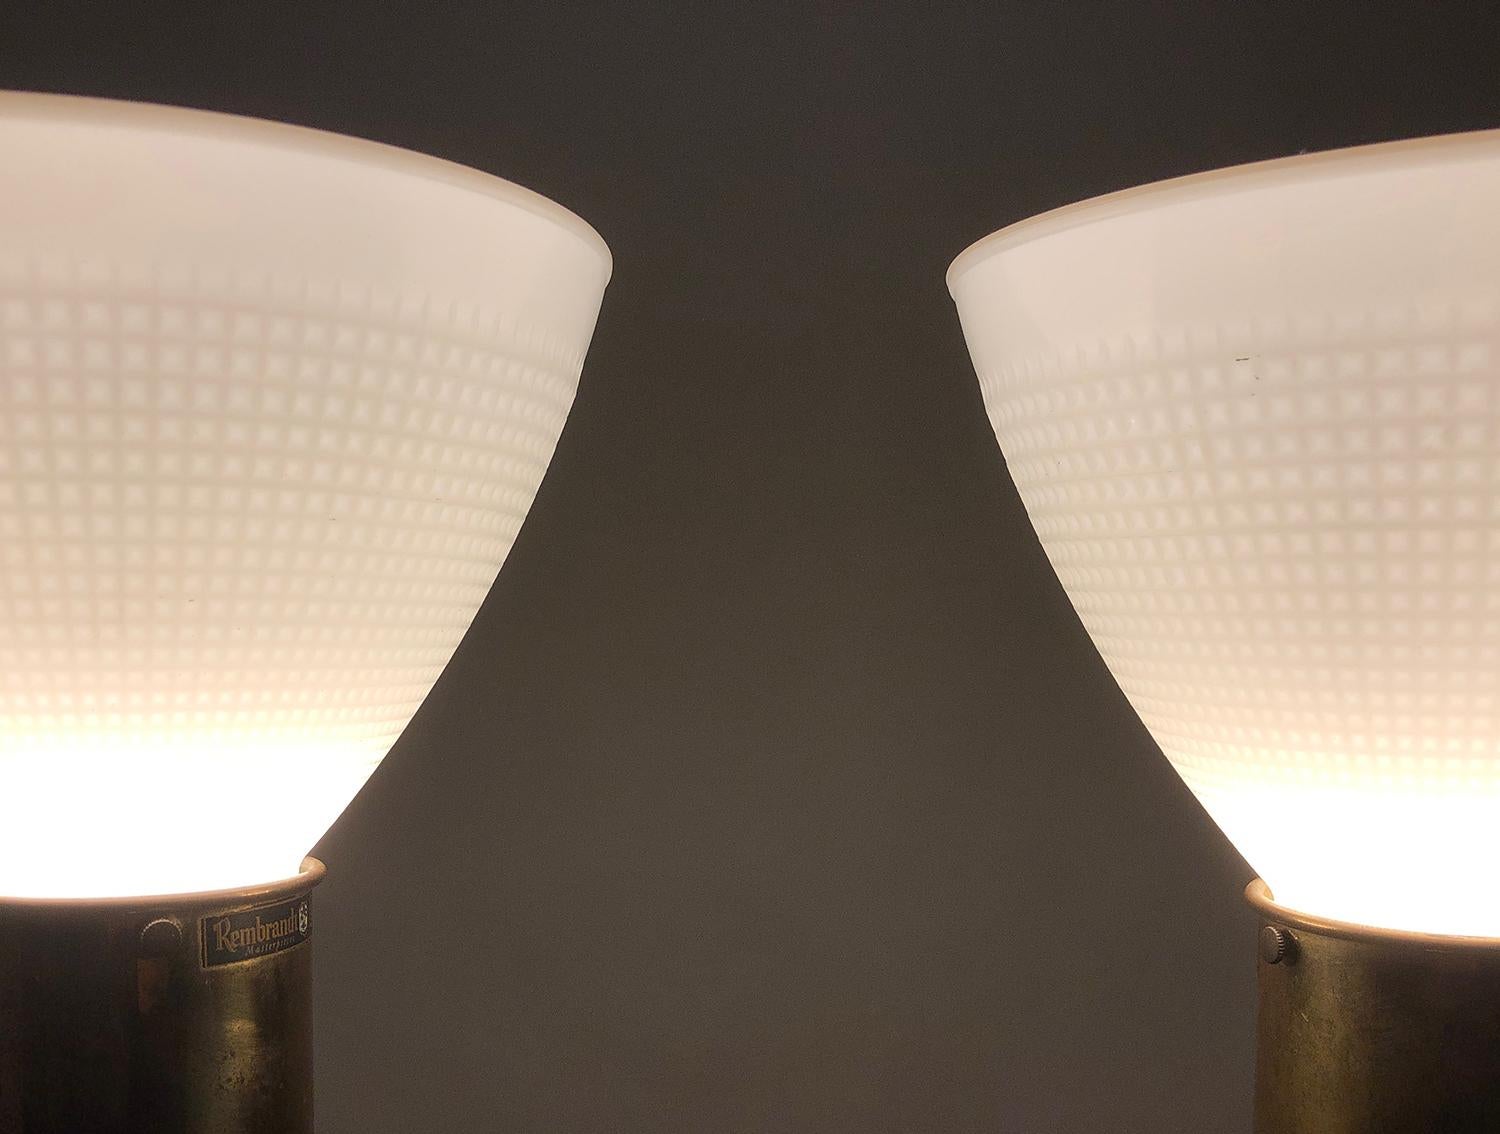 Pair of American Mid-Century Modern Obelisk Table Lamps by Rembrandt Lighting 11